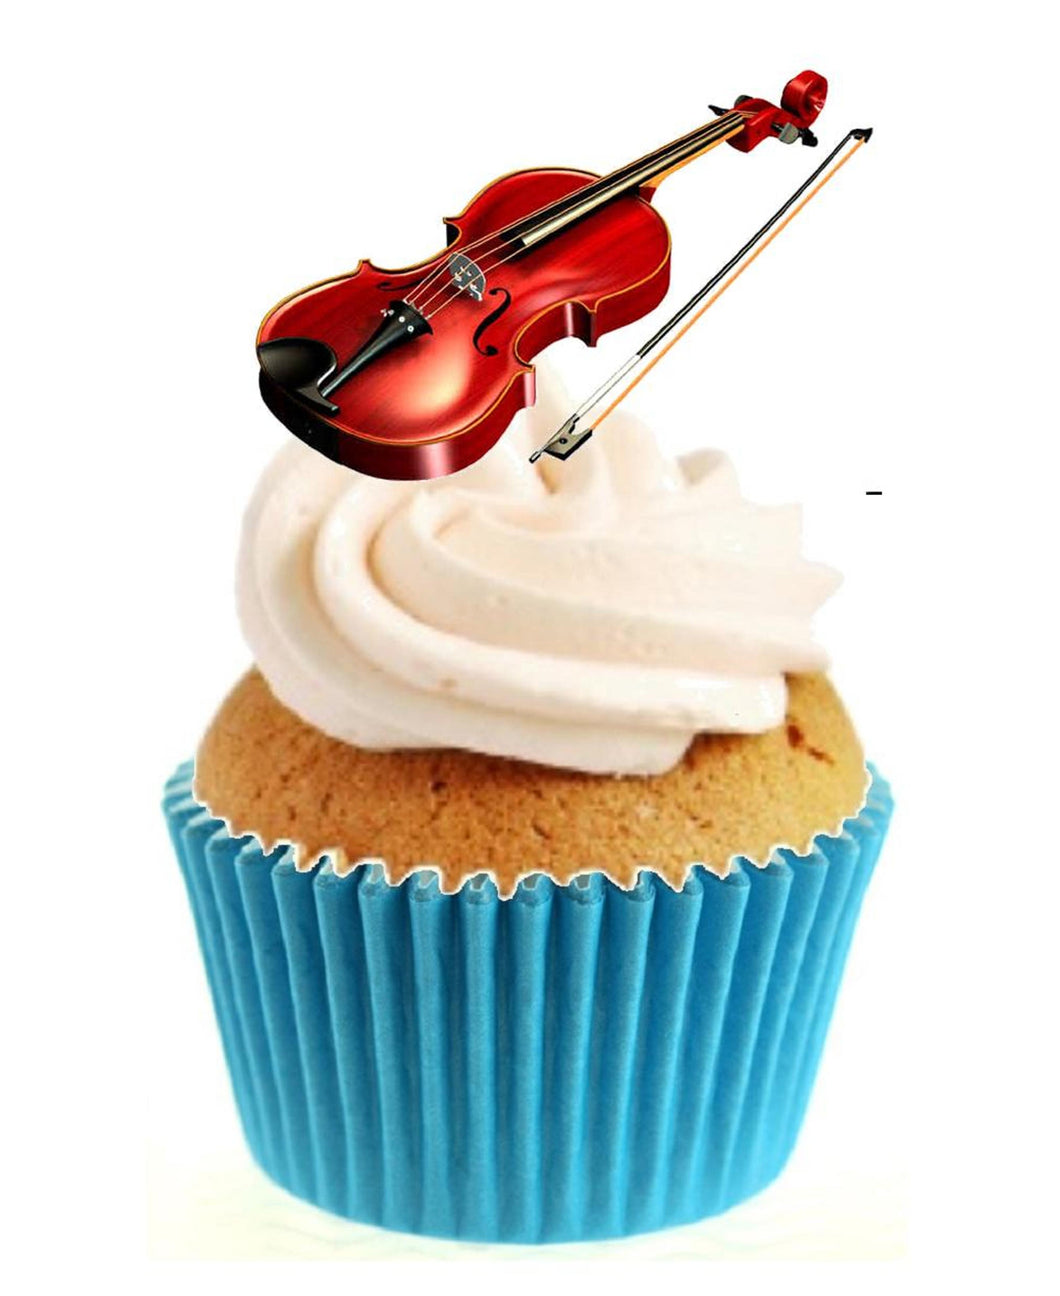 Violin Stand Up Cake Toppers (12 pack)